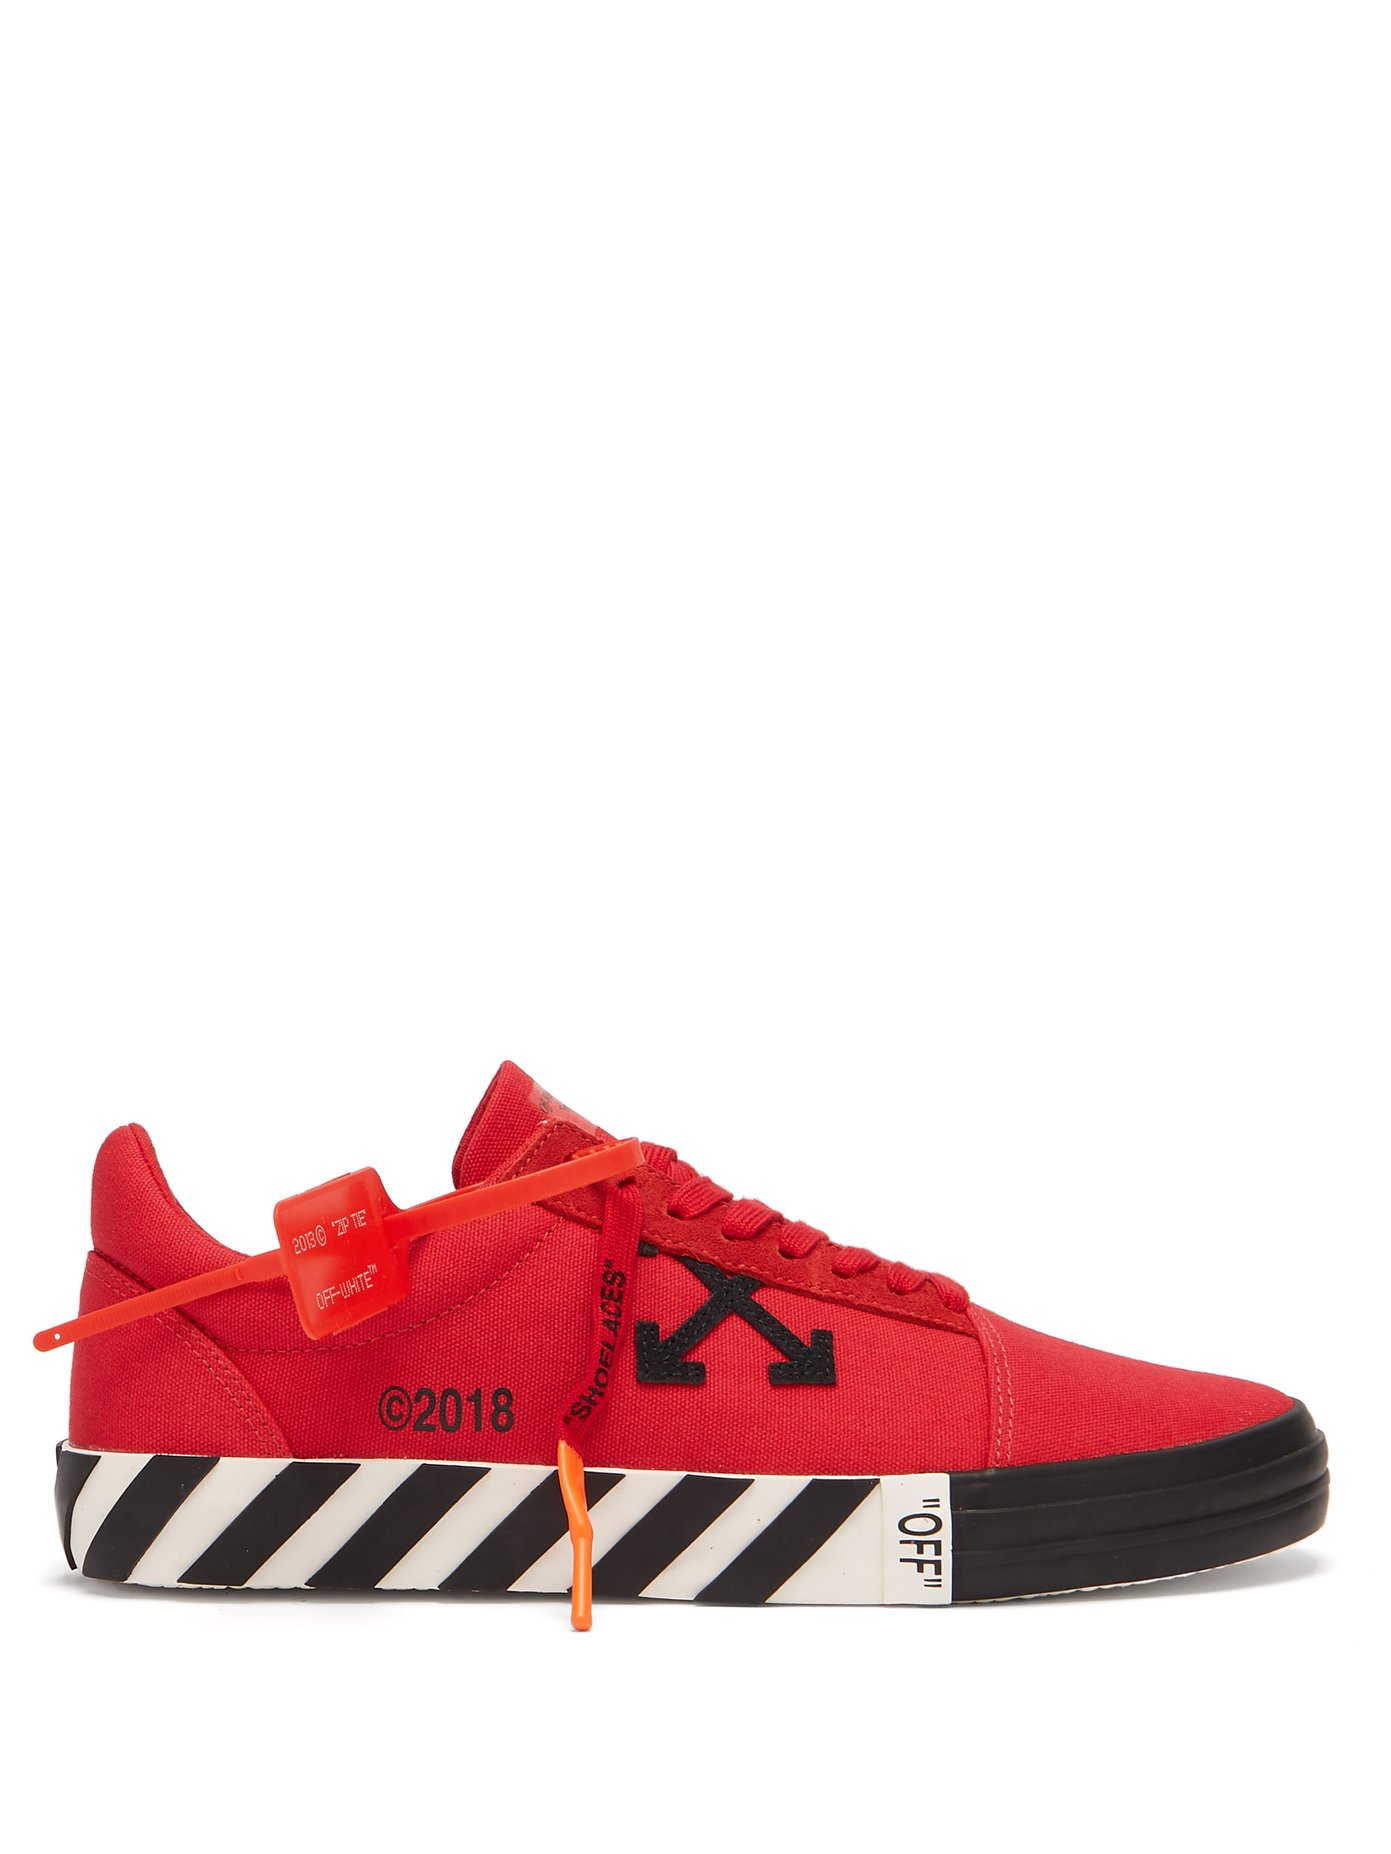 off white low top